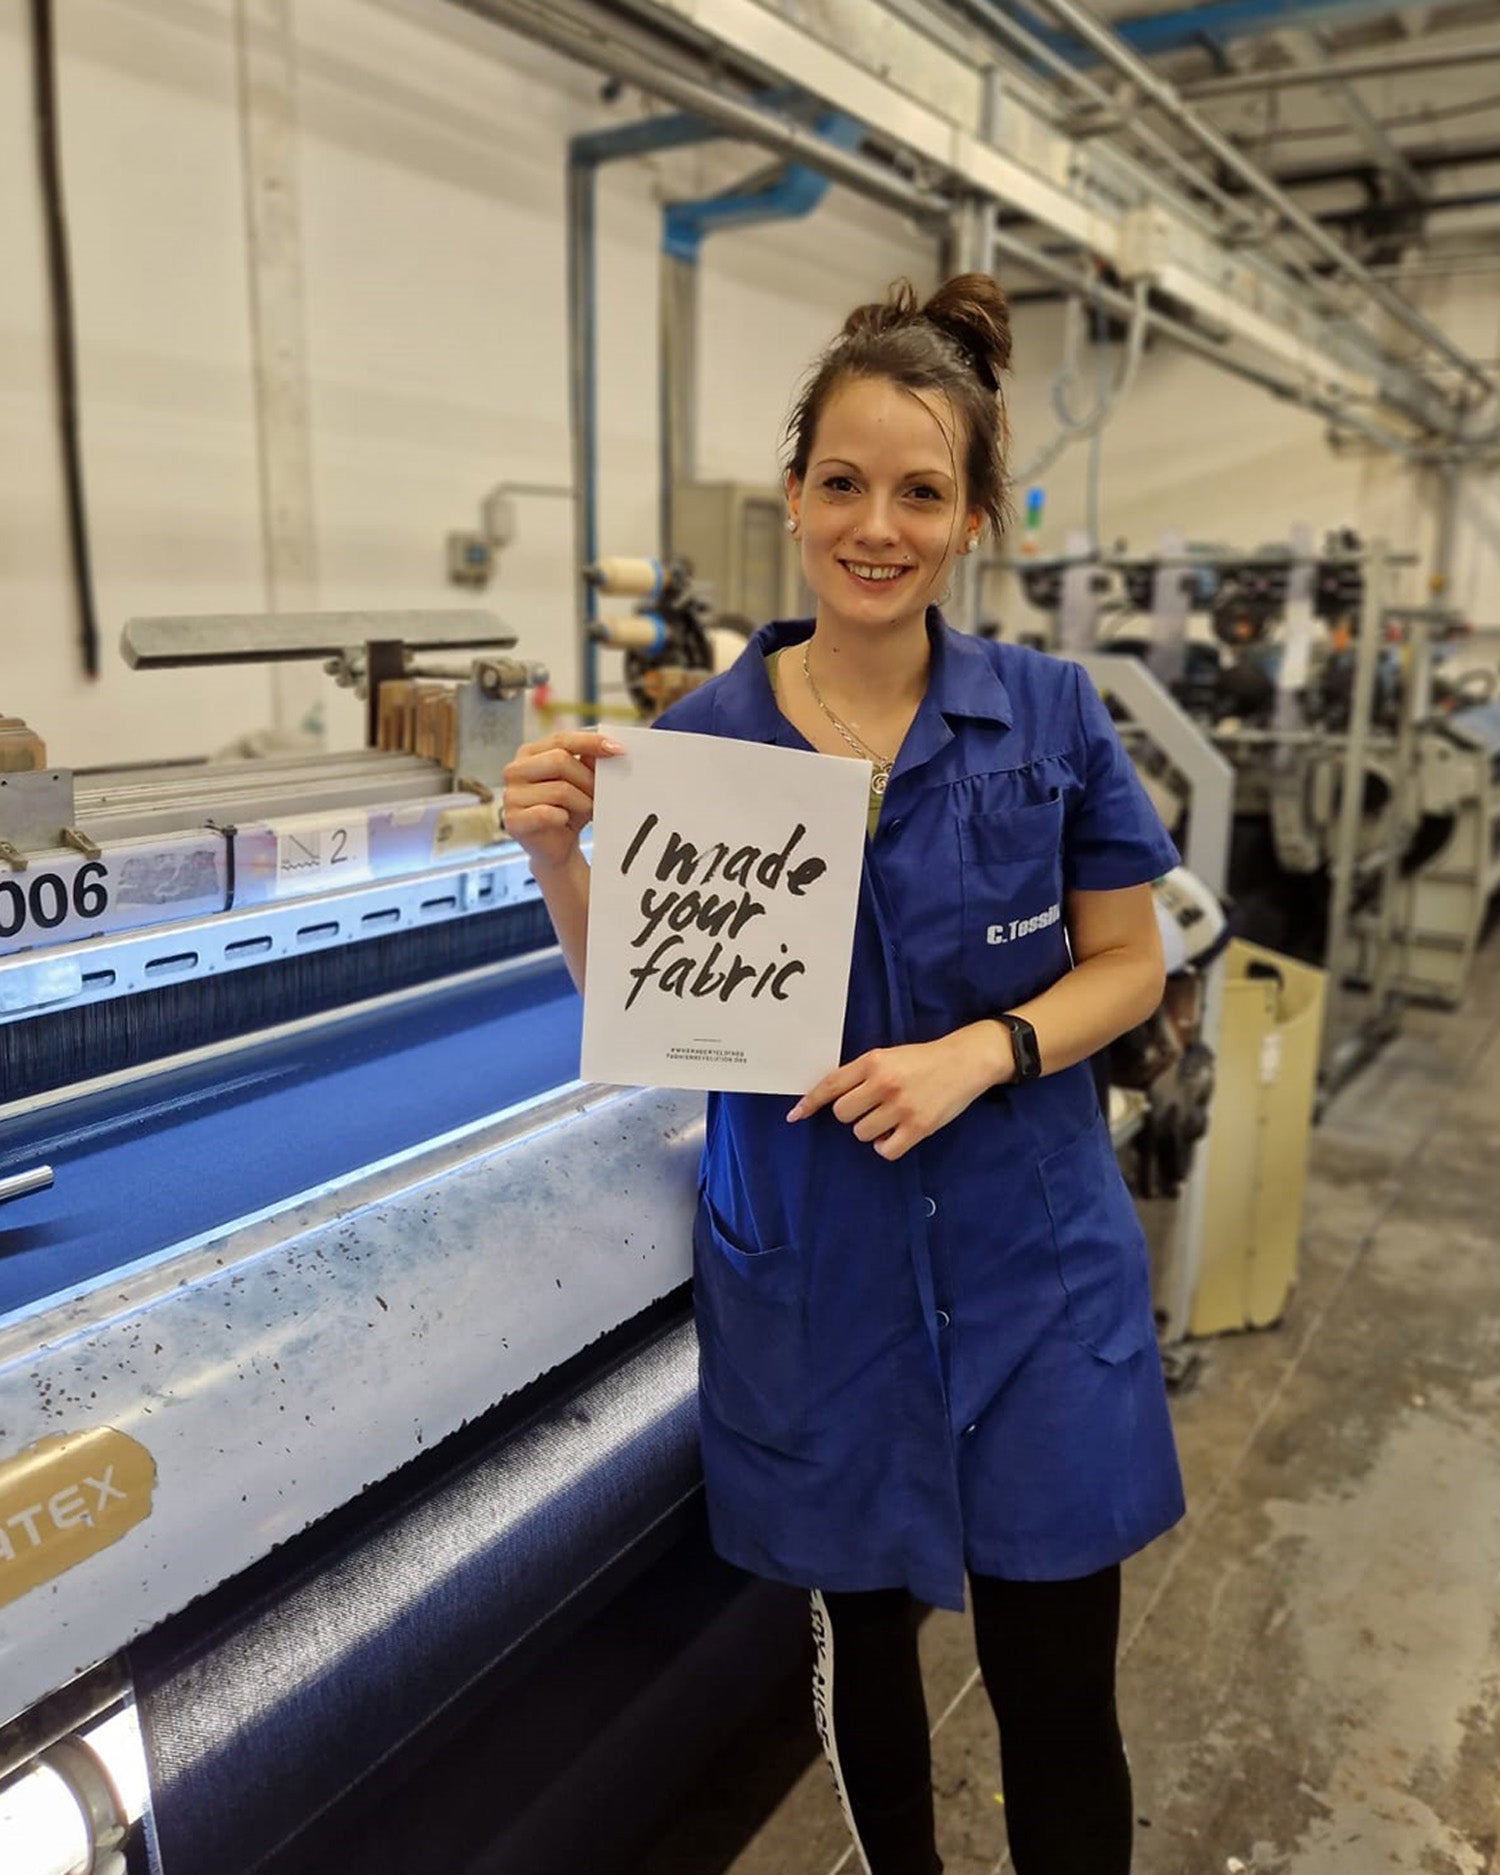 Fabric maker and weaver, Susanna, stands in front of a weaving machine in the fabric mill, Canclini in Italy, wearing a blue coat, holding a sign saying 'I made your fabric'.